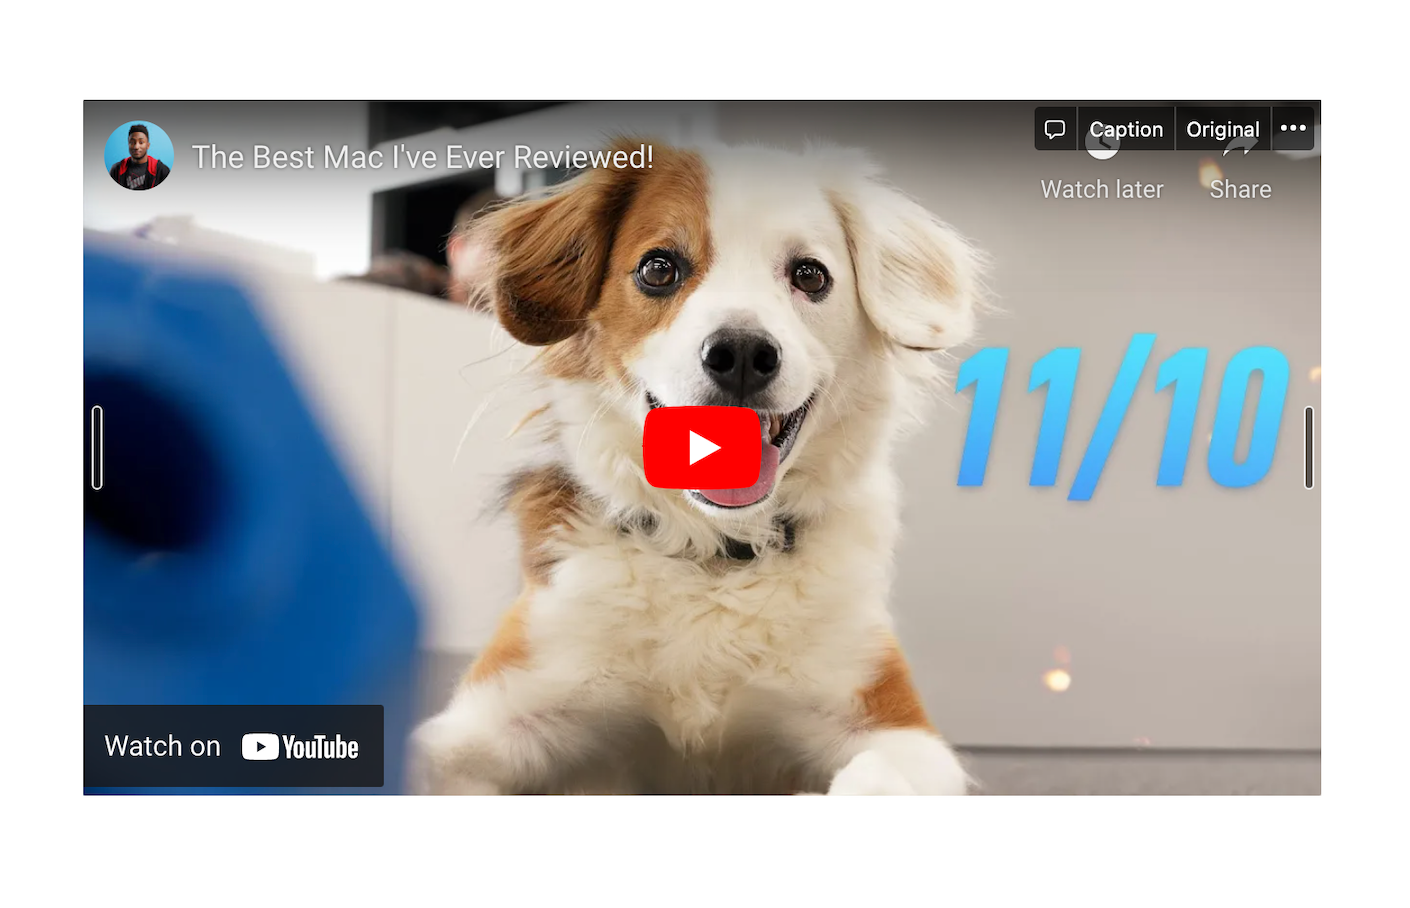 A YouTube video of a dog embedded into Notion